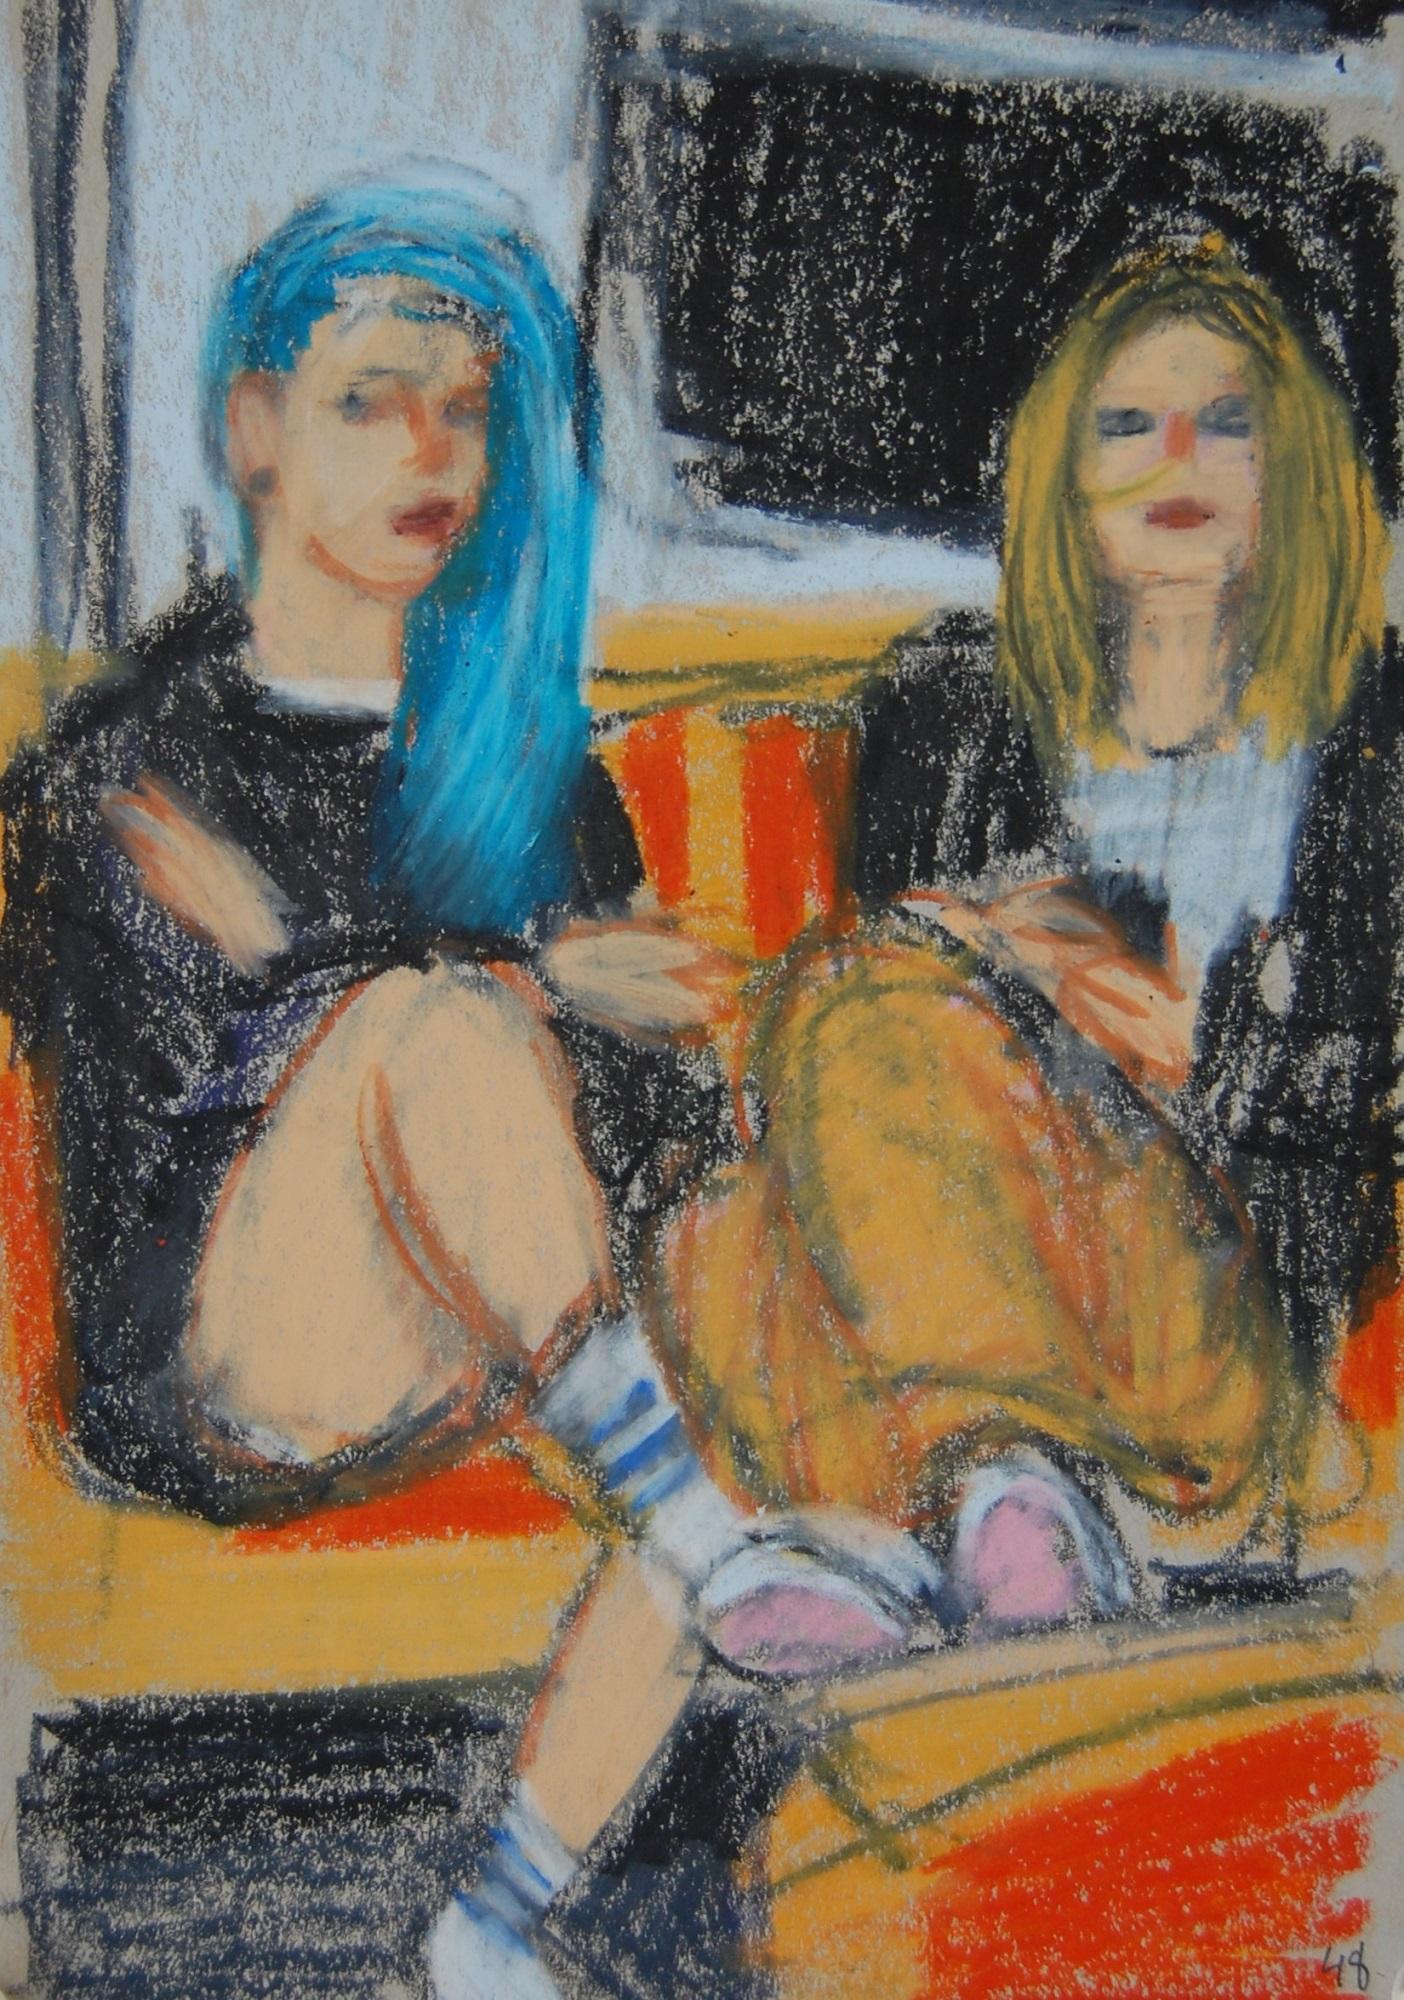 Patrick Jewell Figurative Painting - Teenagers with Blue Hair and Nose Chain